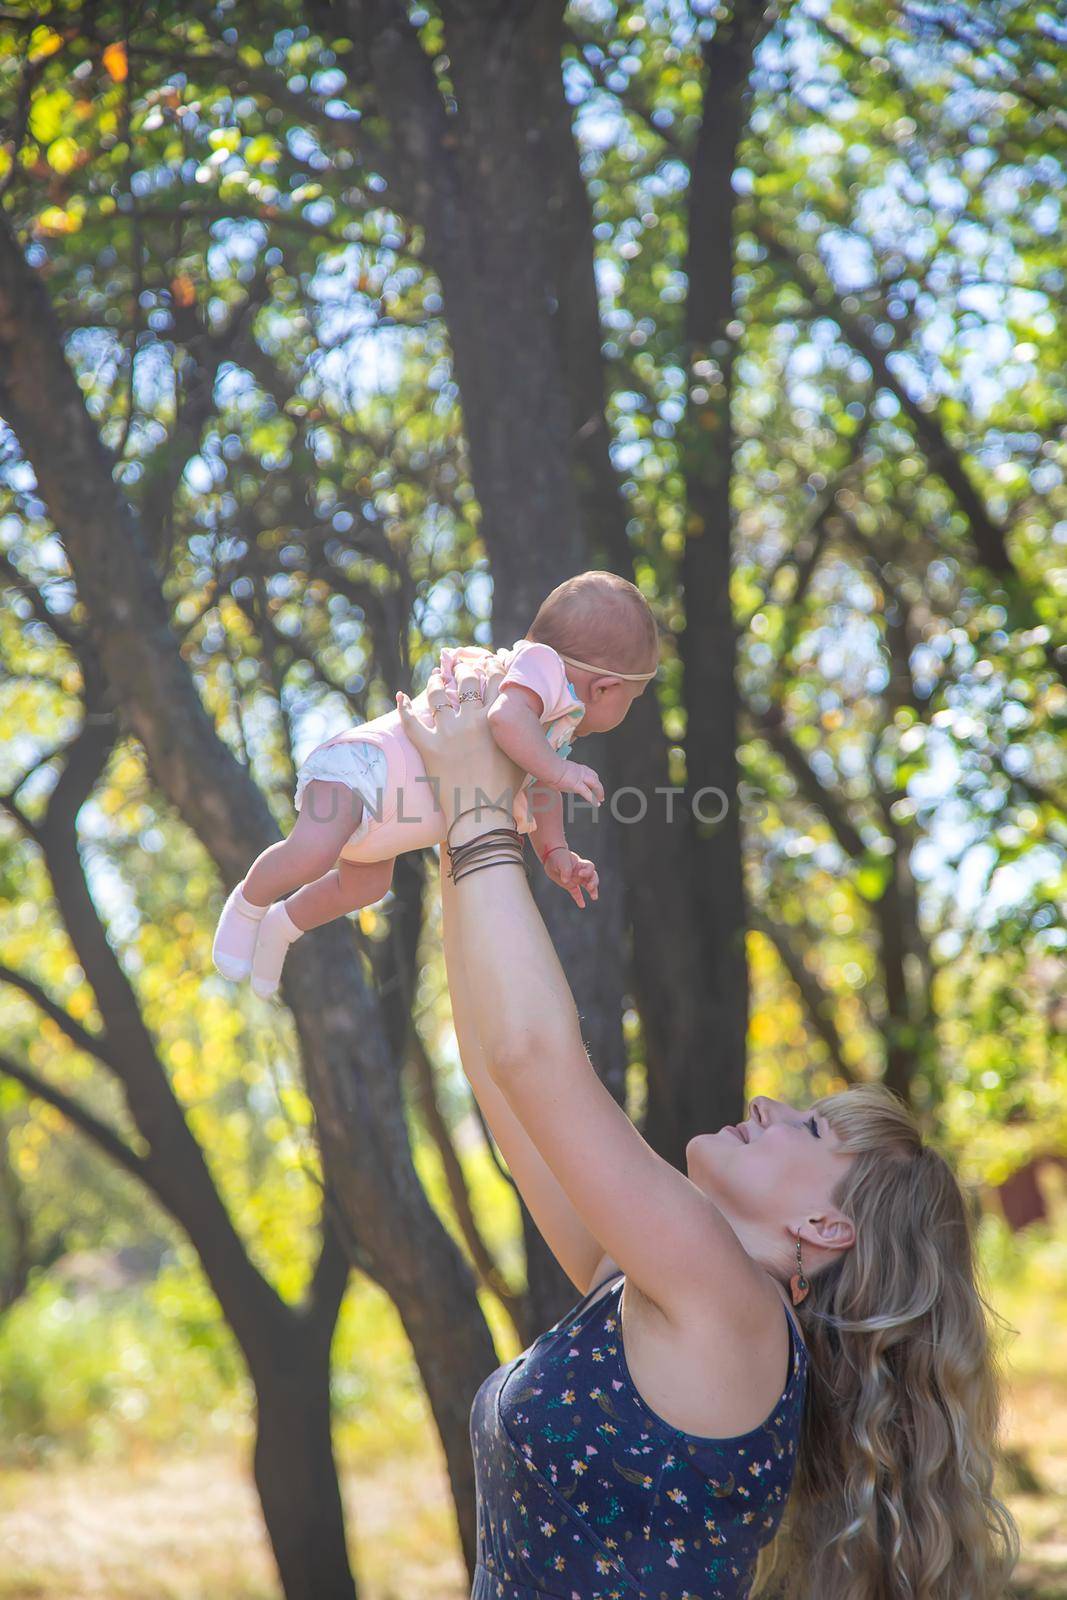 Mom is holding a newborn baby in nature. Selective focus. People.